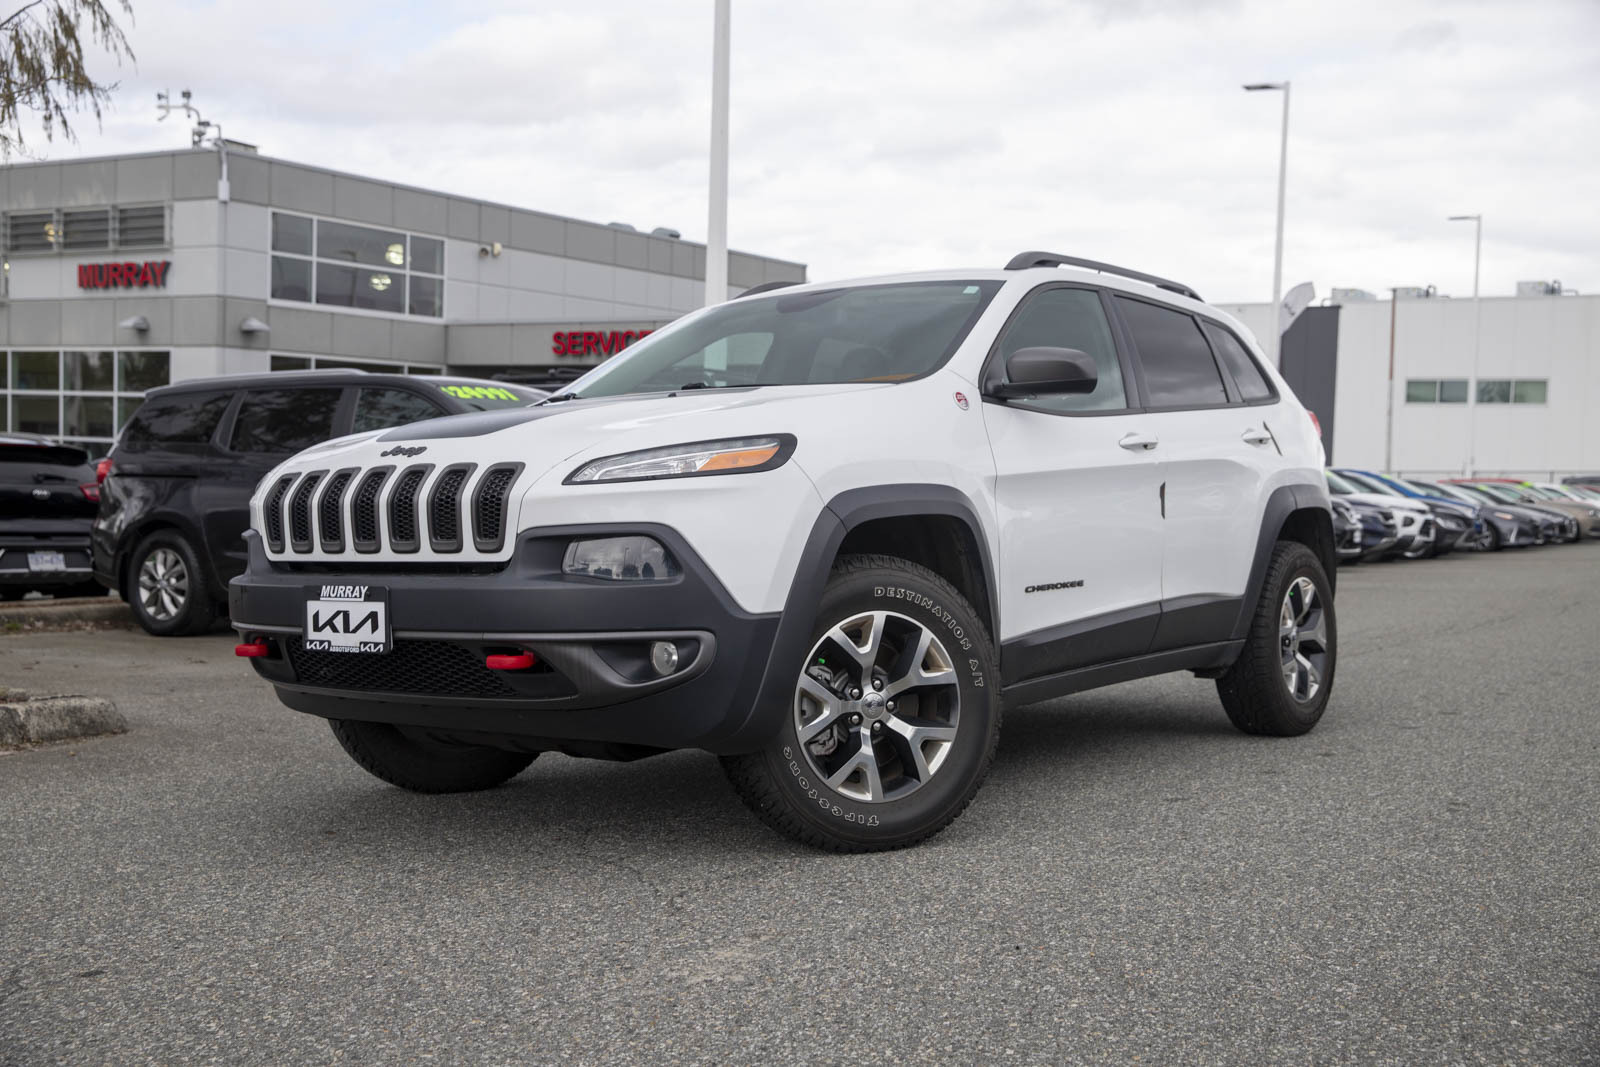 2015 Jeep Cherokee Trailhawk! V6! Leather! Sunroof! Nav! 4wd!